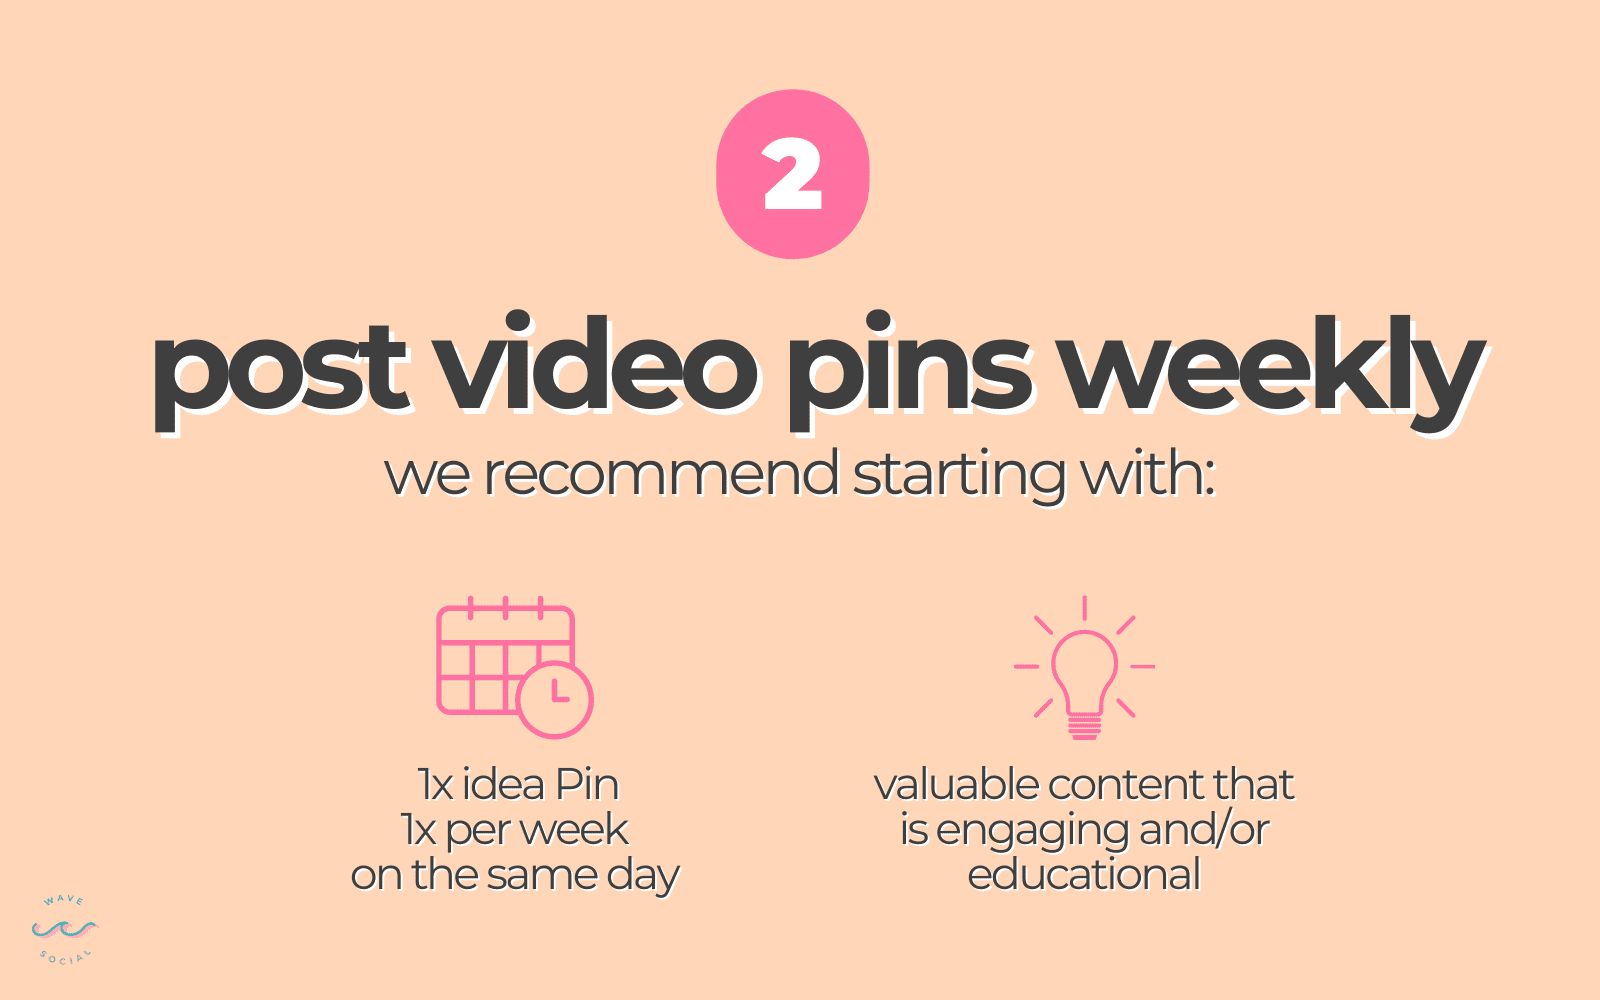 post video pins weekly. we recommend starting with 1 idea pin per week